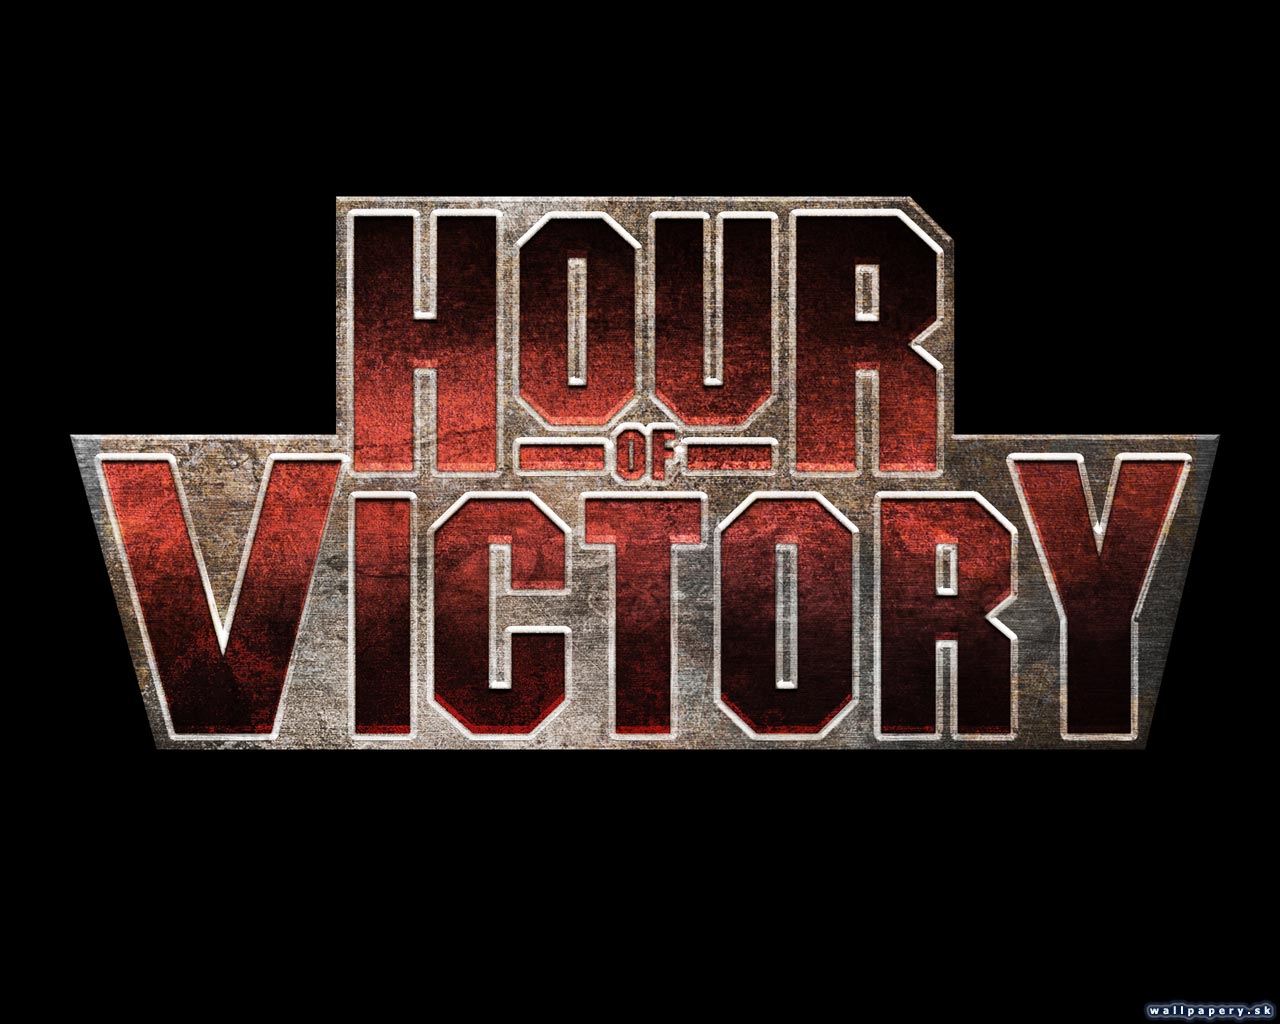 Hour of Victory - wallpaper 6